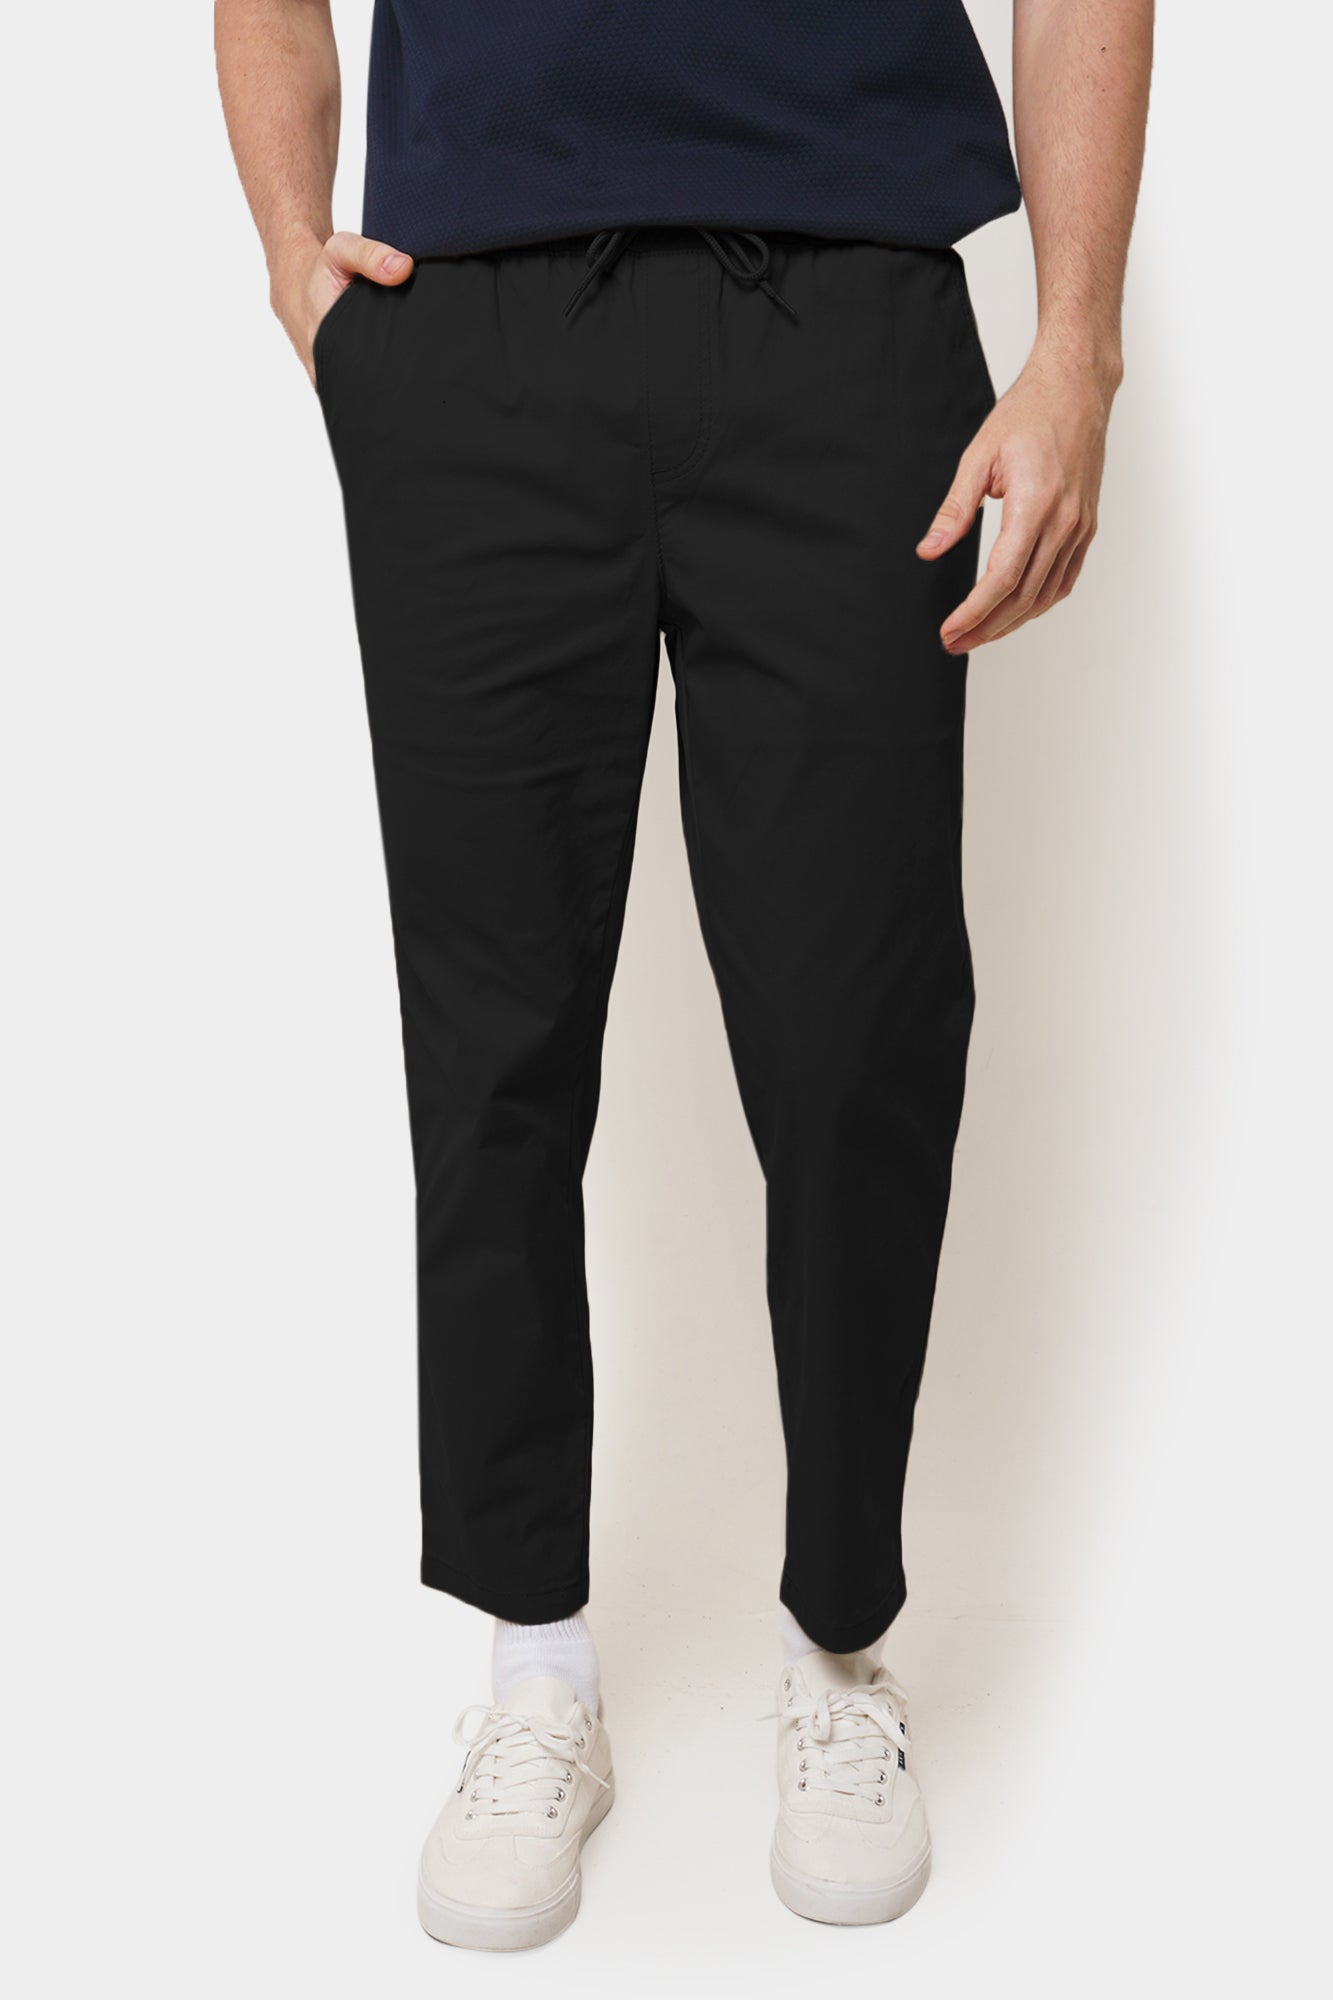 Basic Dapper Fit Ankle Length Pull-On Trousers